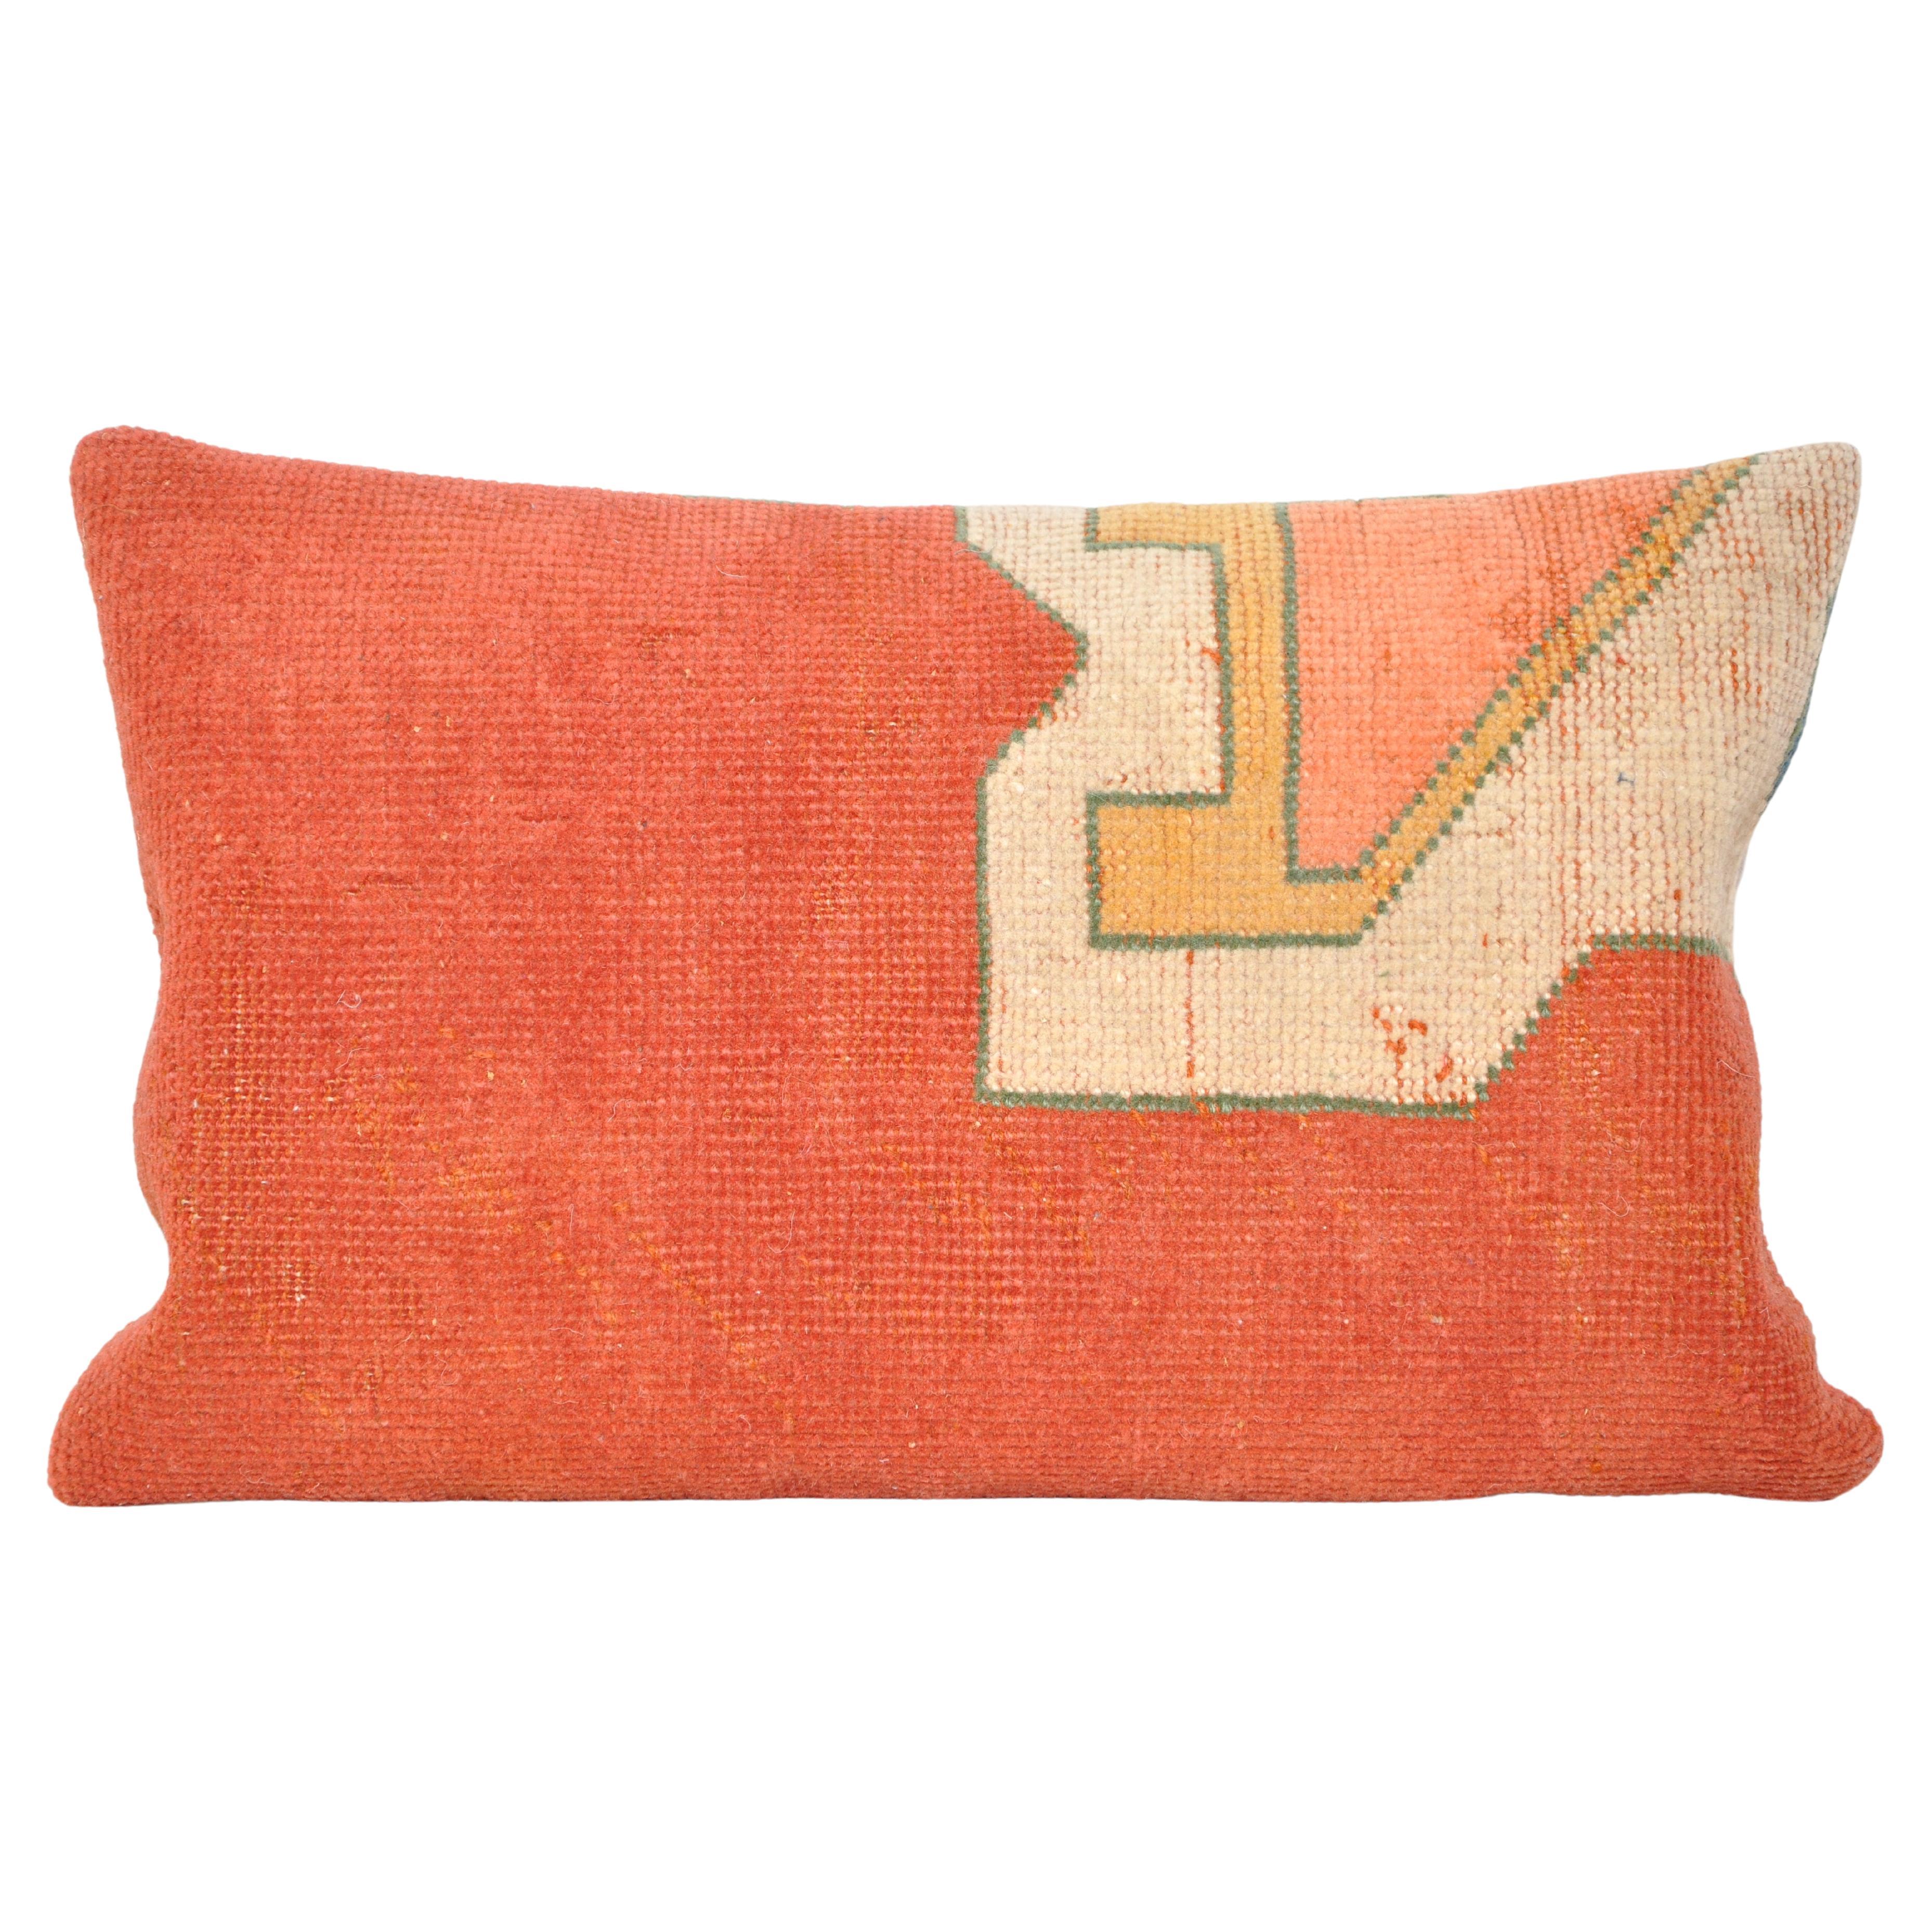 Vintage Kilim Rug Pillow with Irish Linen by Katie Larmour Cushions Orange For Sale